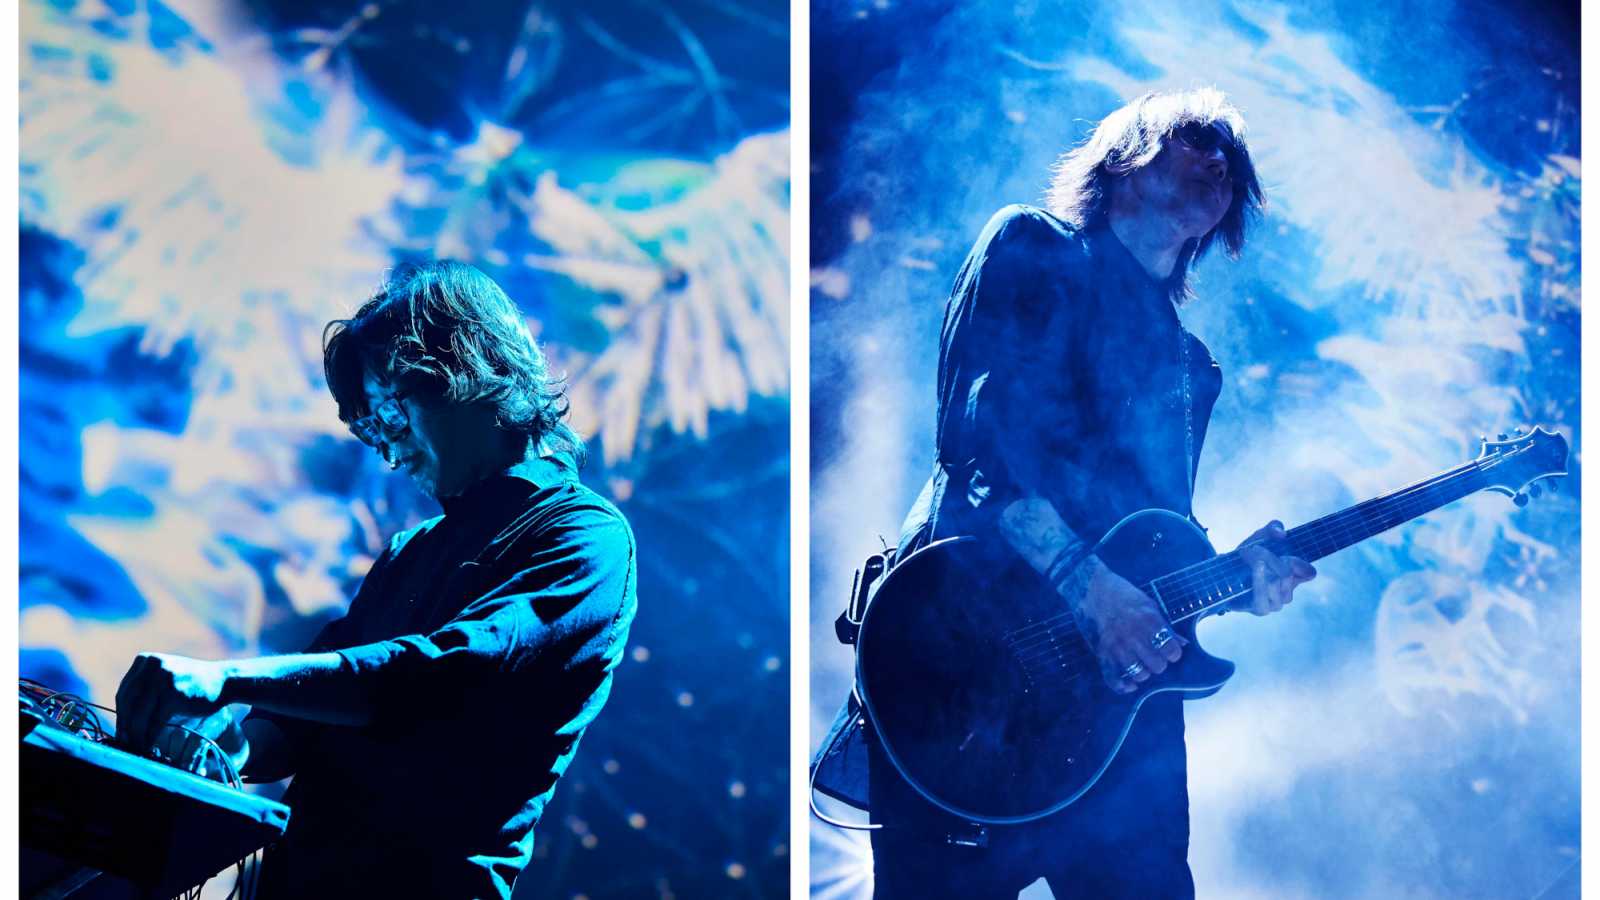 First Album from SUGIZO×HATAKEN © SUGIZO x HATAKEN. All rights reserved.